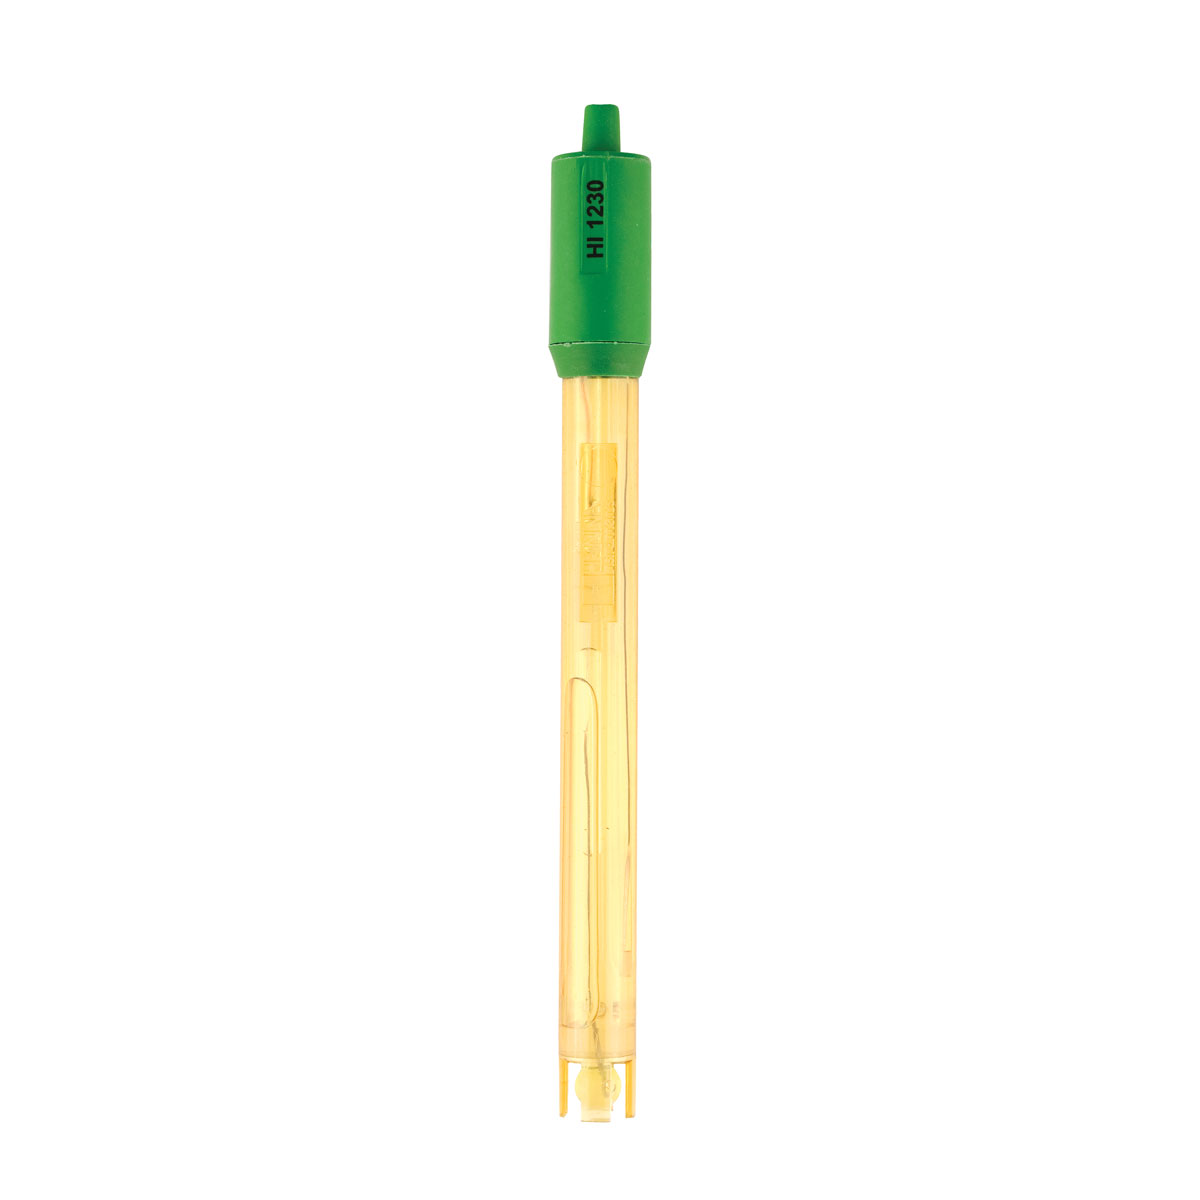 HI1230B Combination pH Electrode for Field Applications